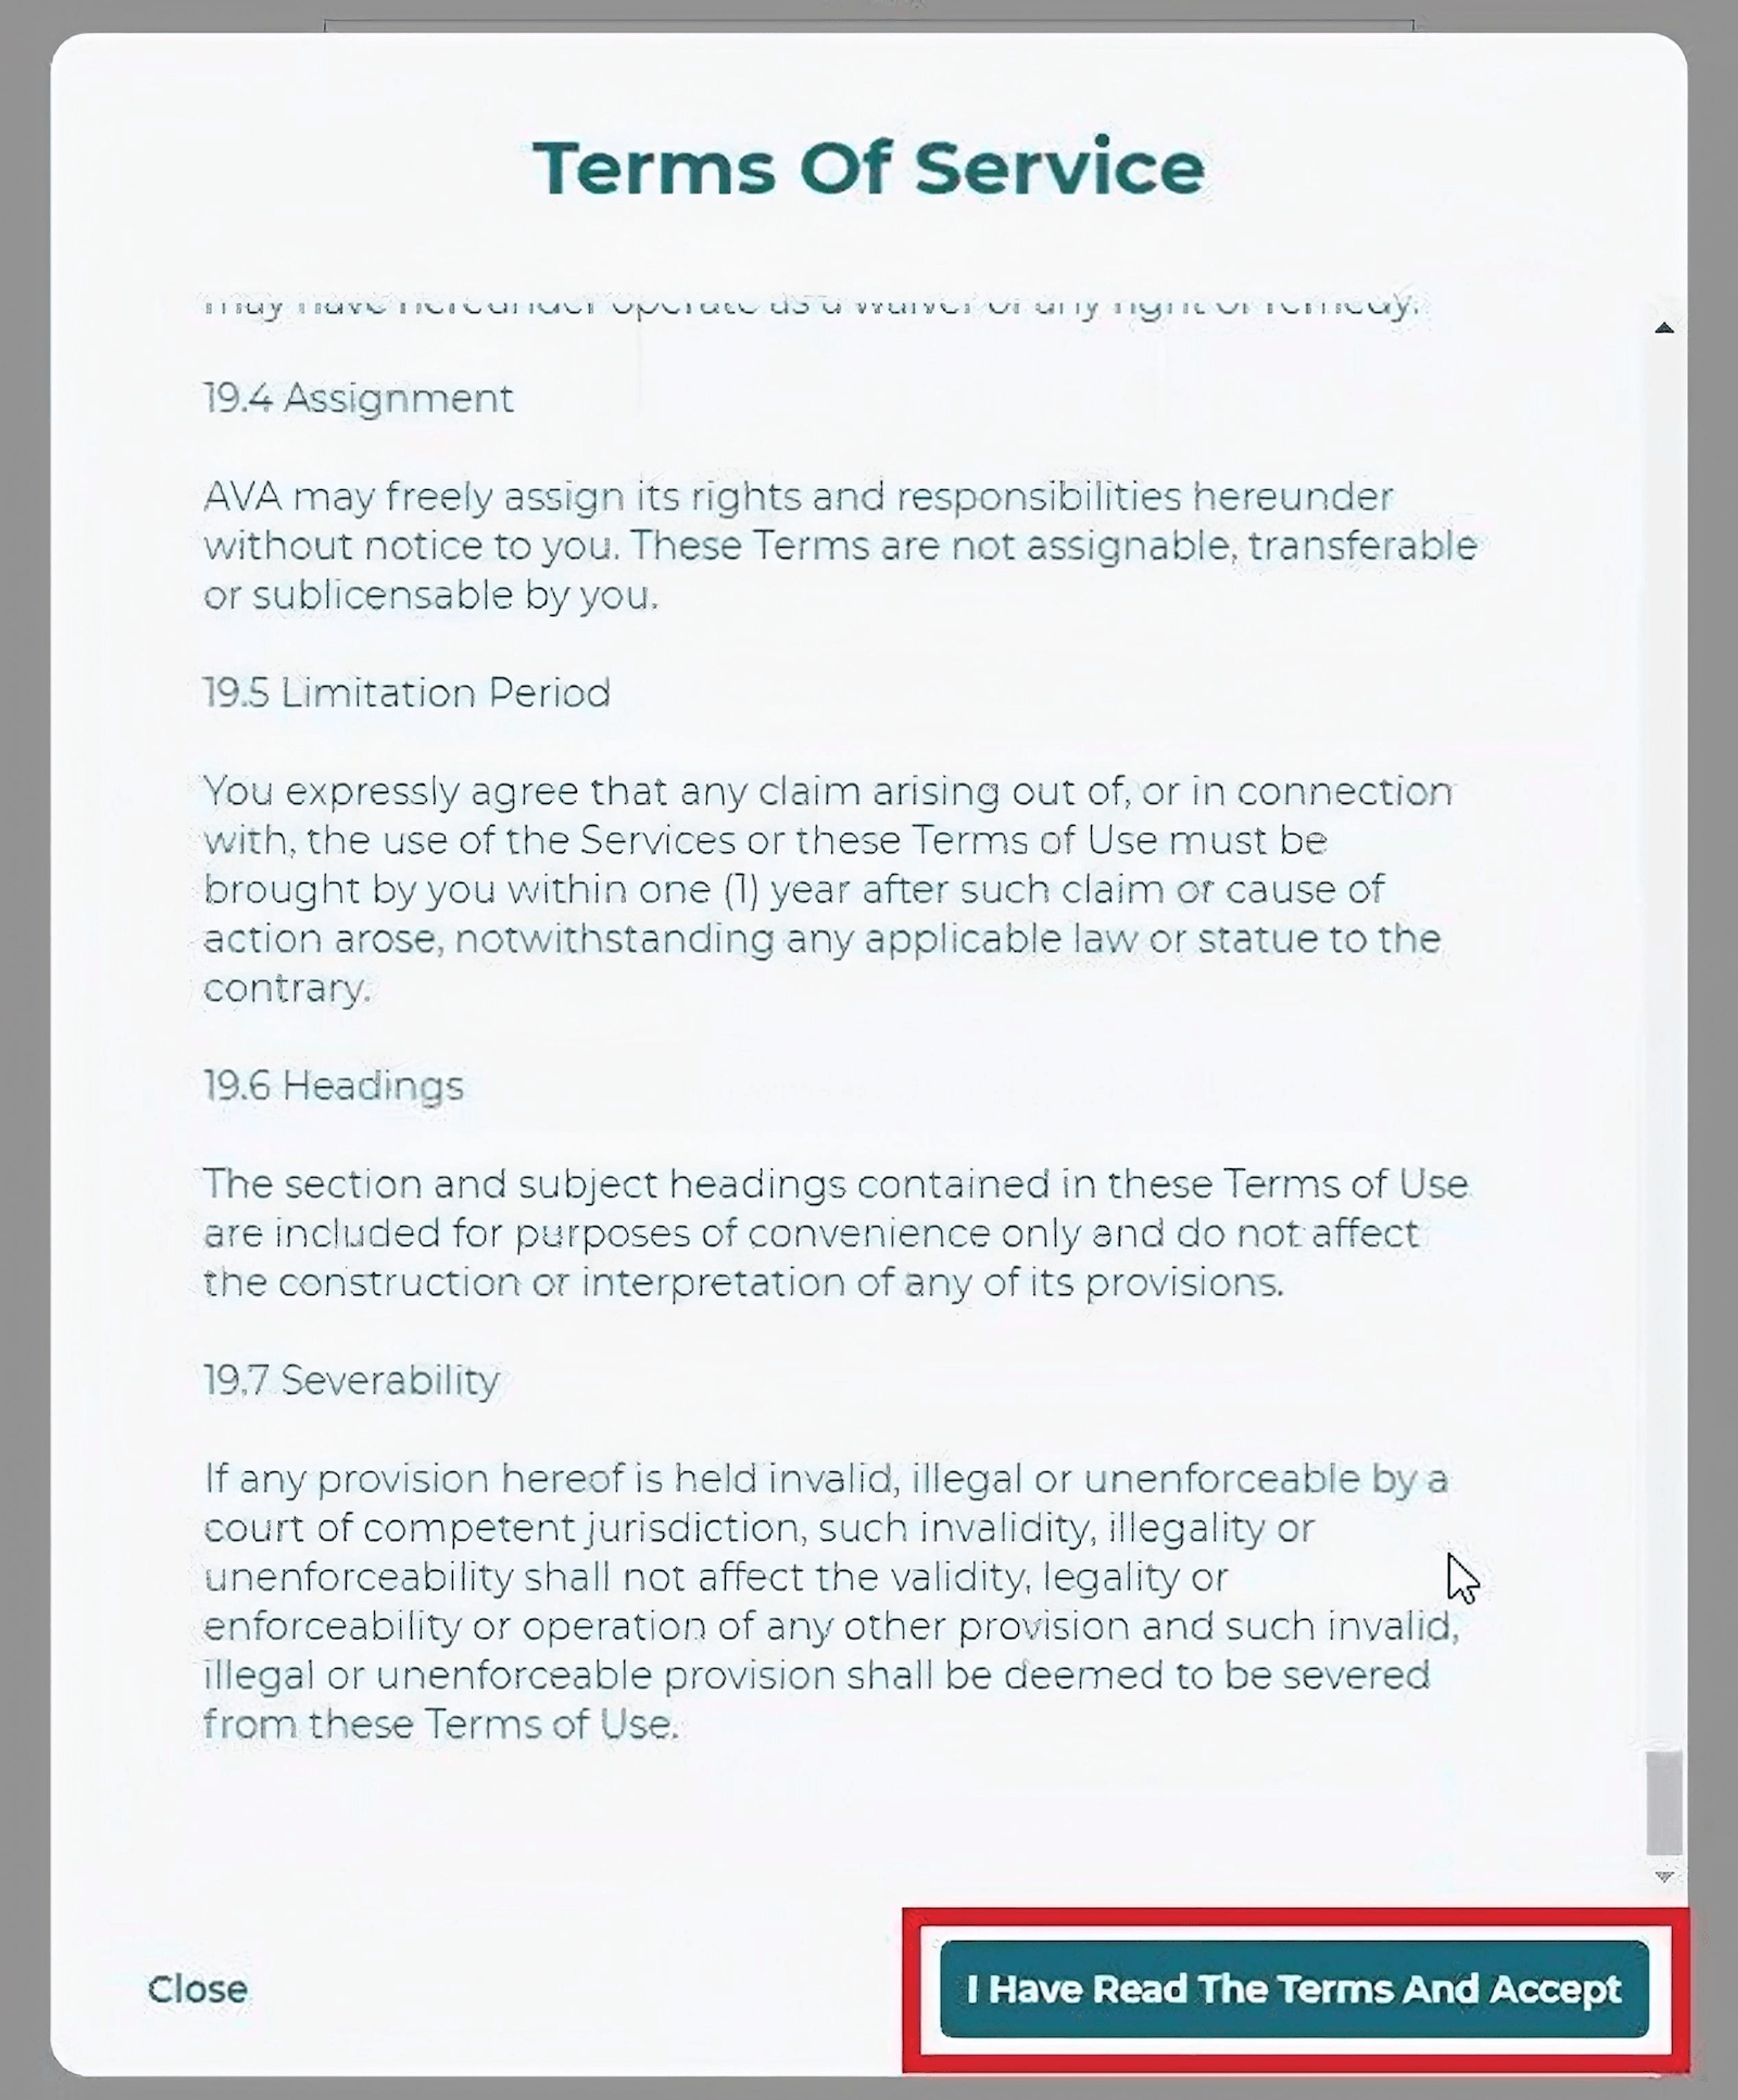 Terms of Service window with a red box highlighting a button labeled 'I Have Read The Terms and Accept'